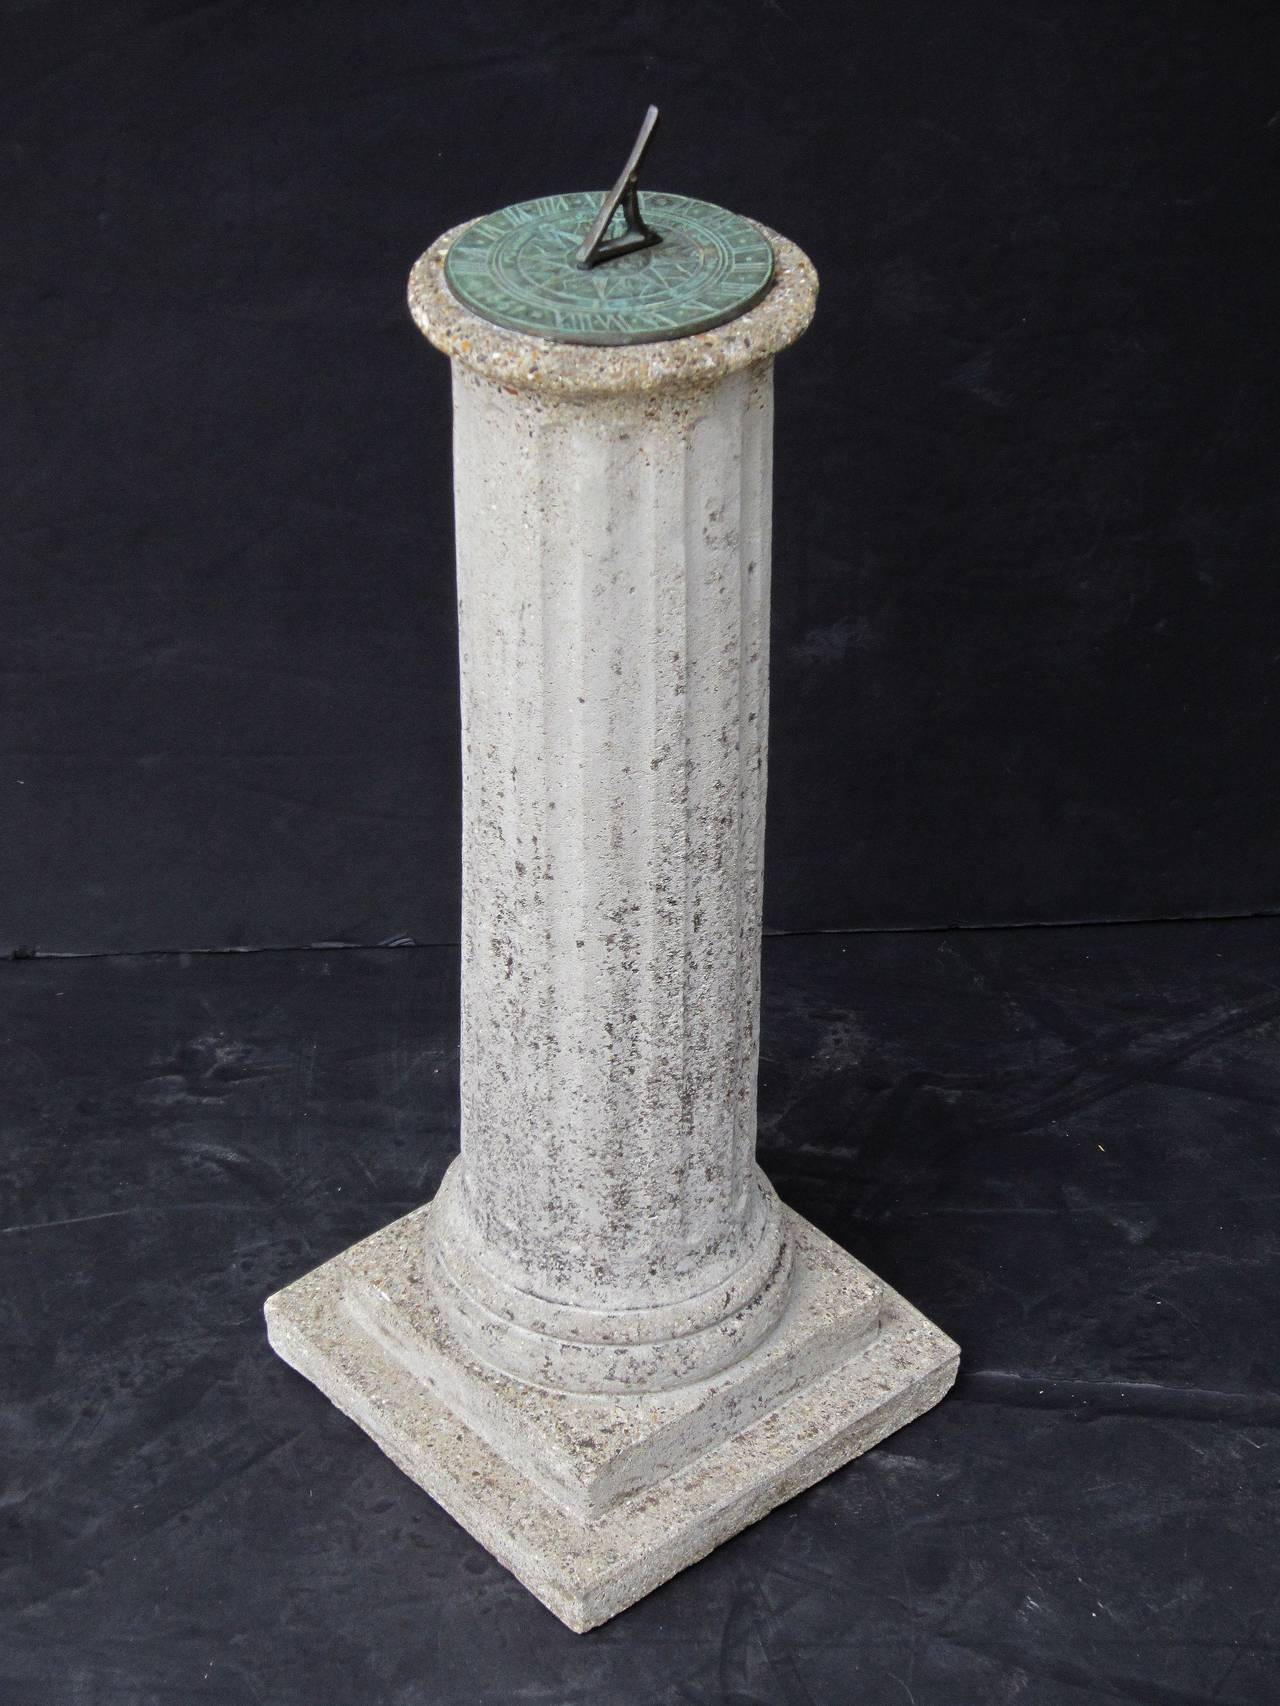 A Fine English garden column sundial of composition or garden stone featuring a bronze dial inscribed with Roman numerals, cardinal directions and the following quote: 